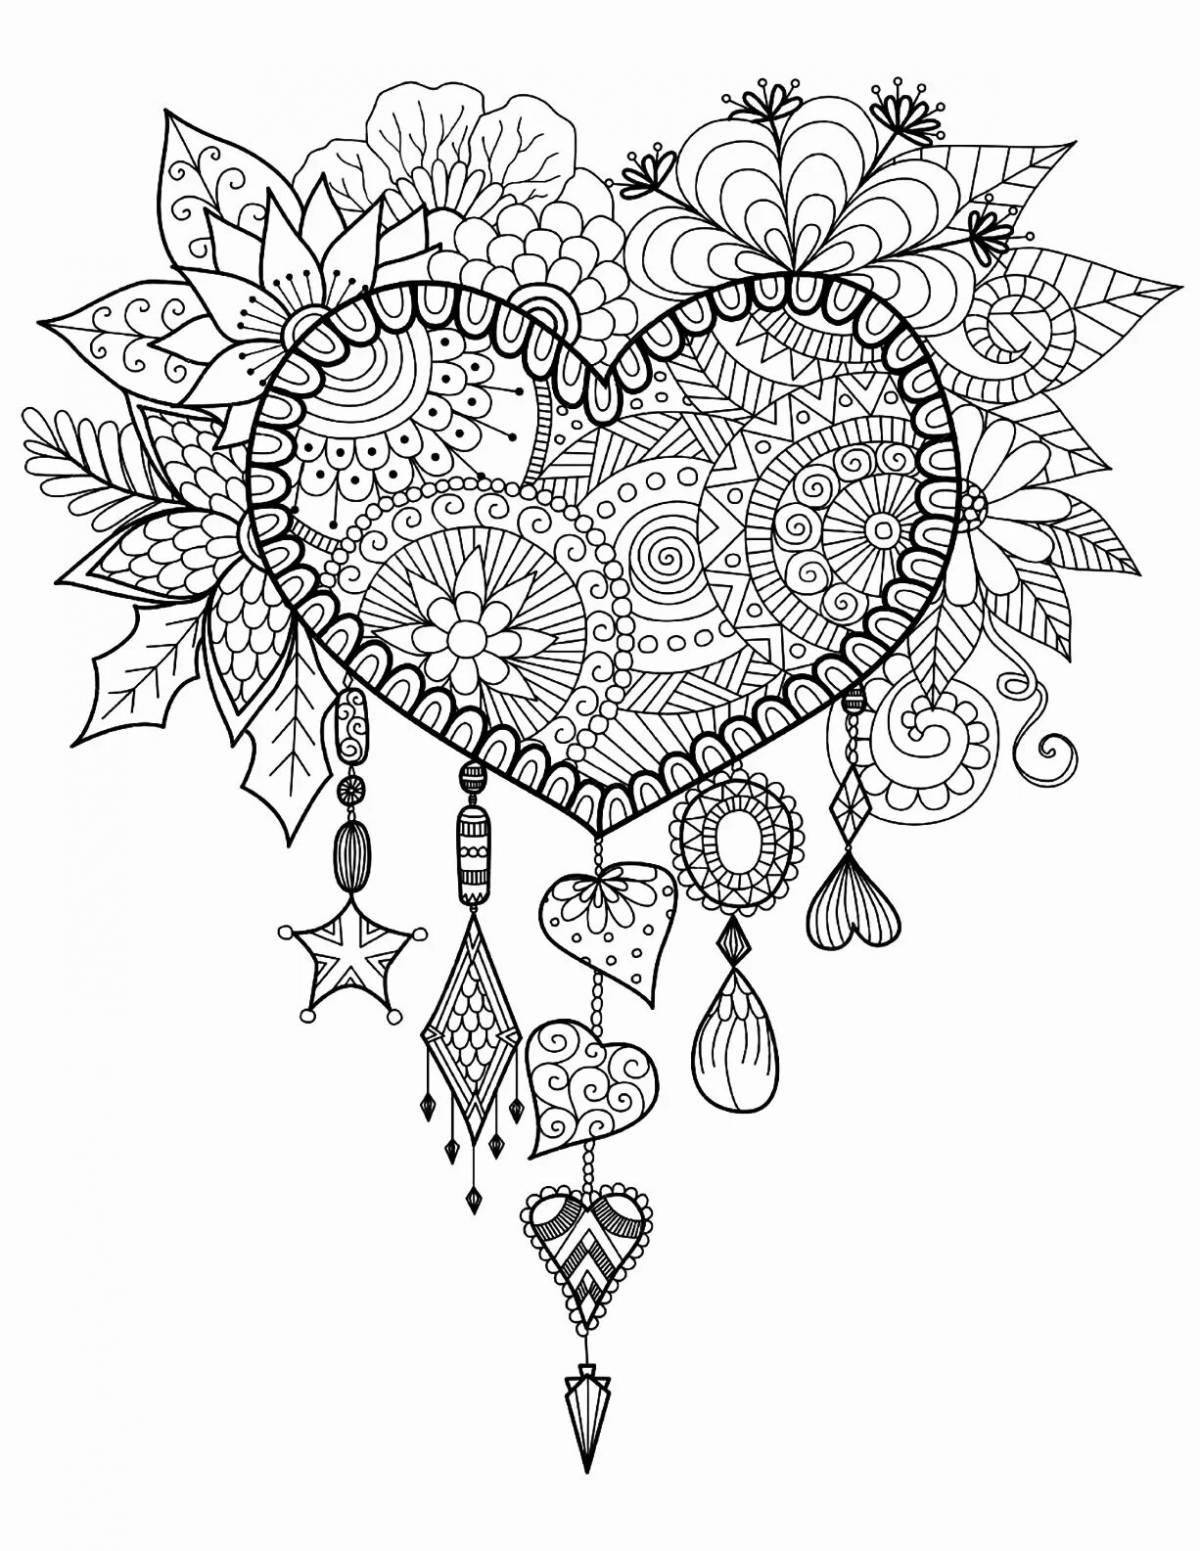 Colorful heart antistress coloring book